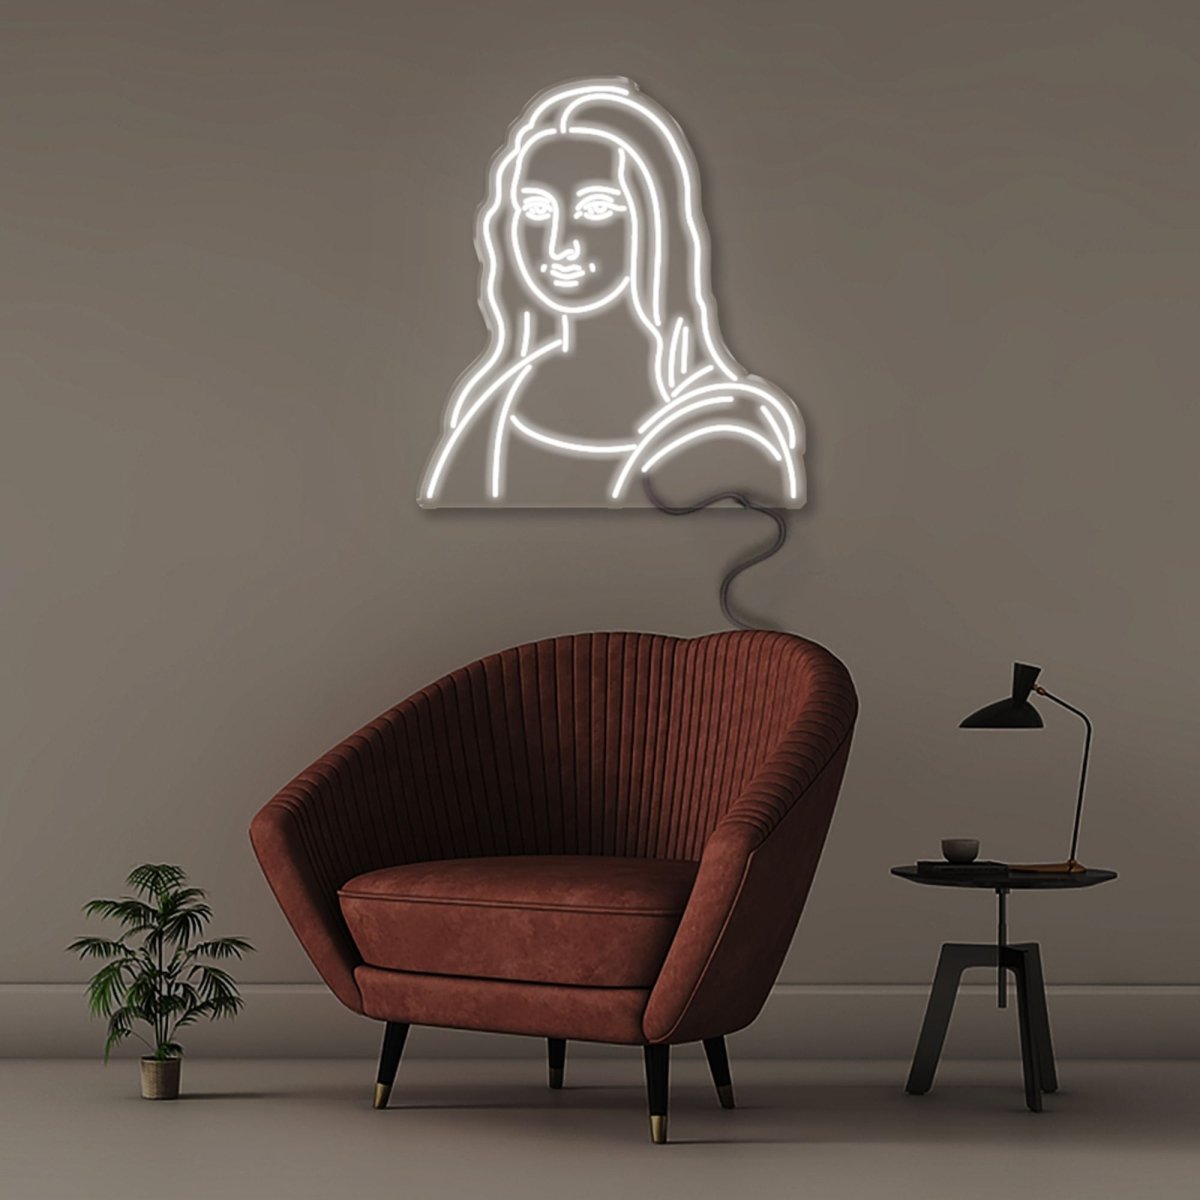 Mona Lisa - Neonific - LED Neon Signs - 91cm (36") - Cool white